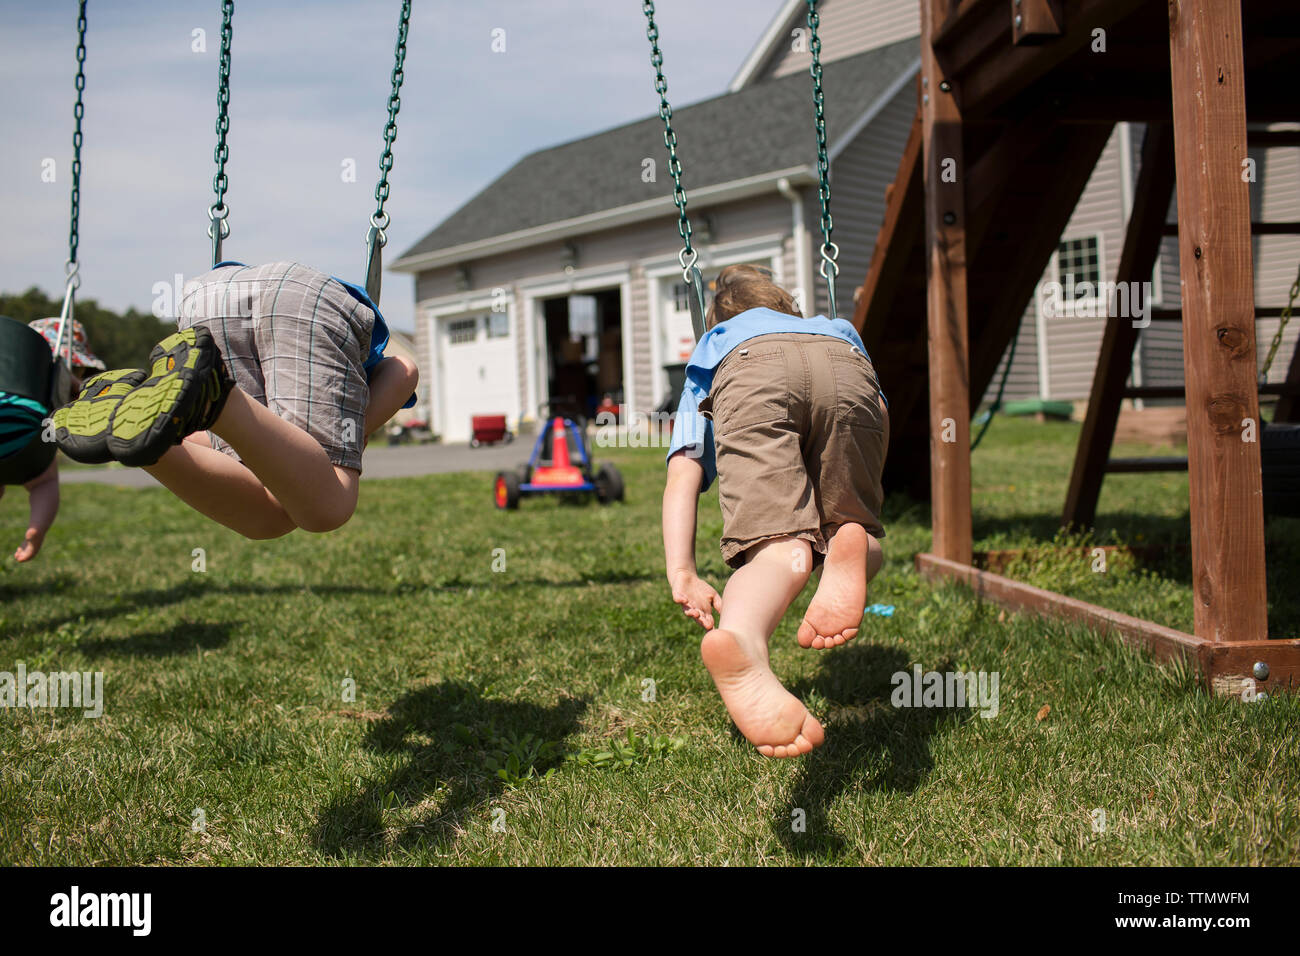 Brothers swinging in backyard during sunny day Stock Photo